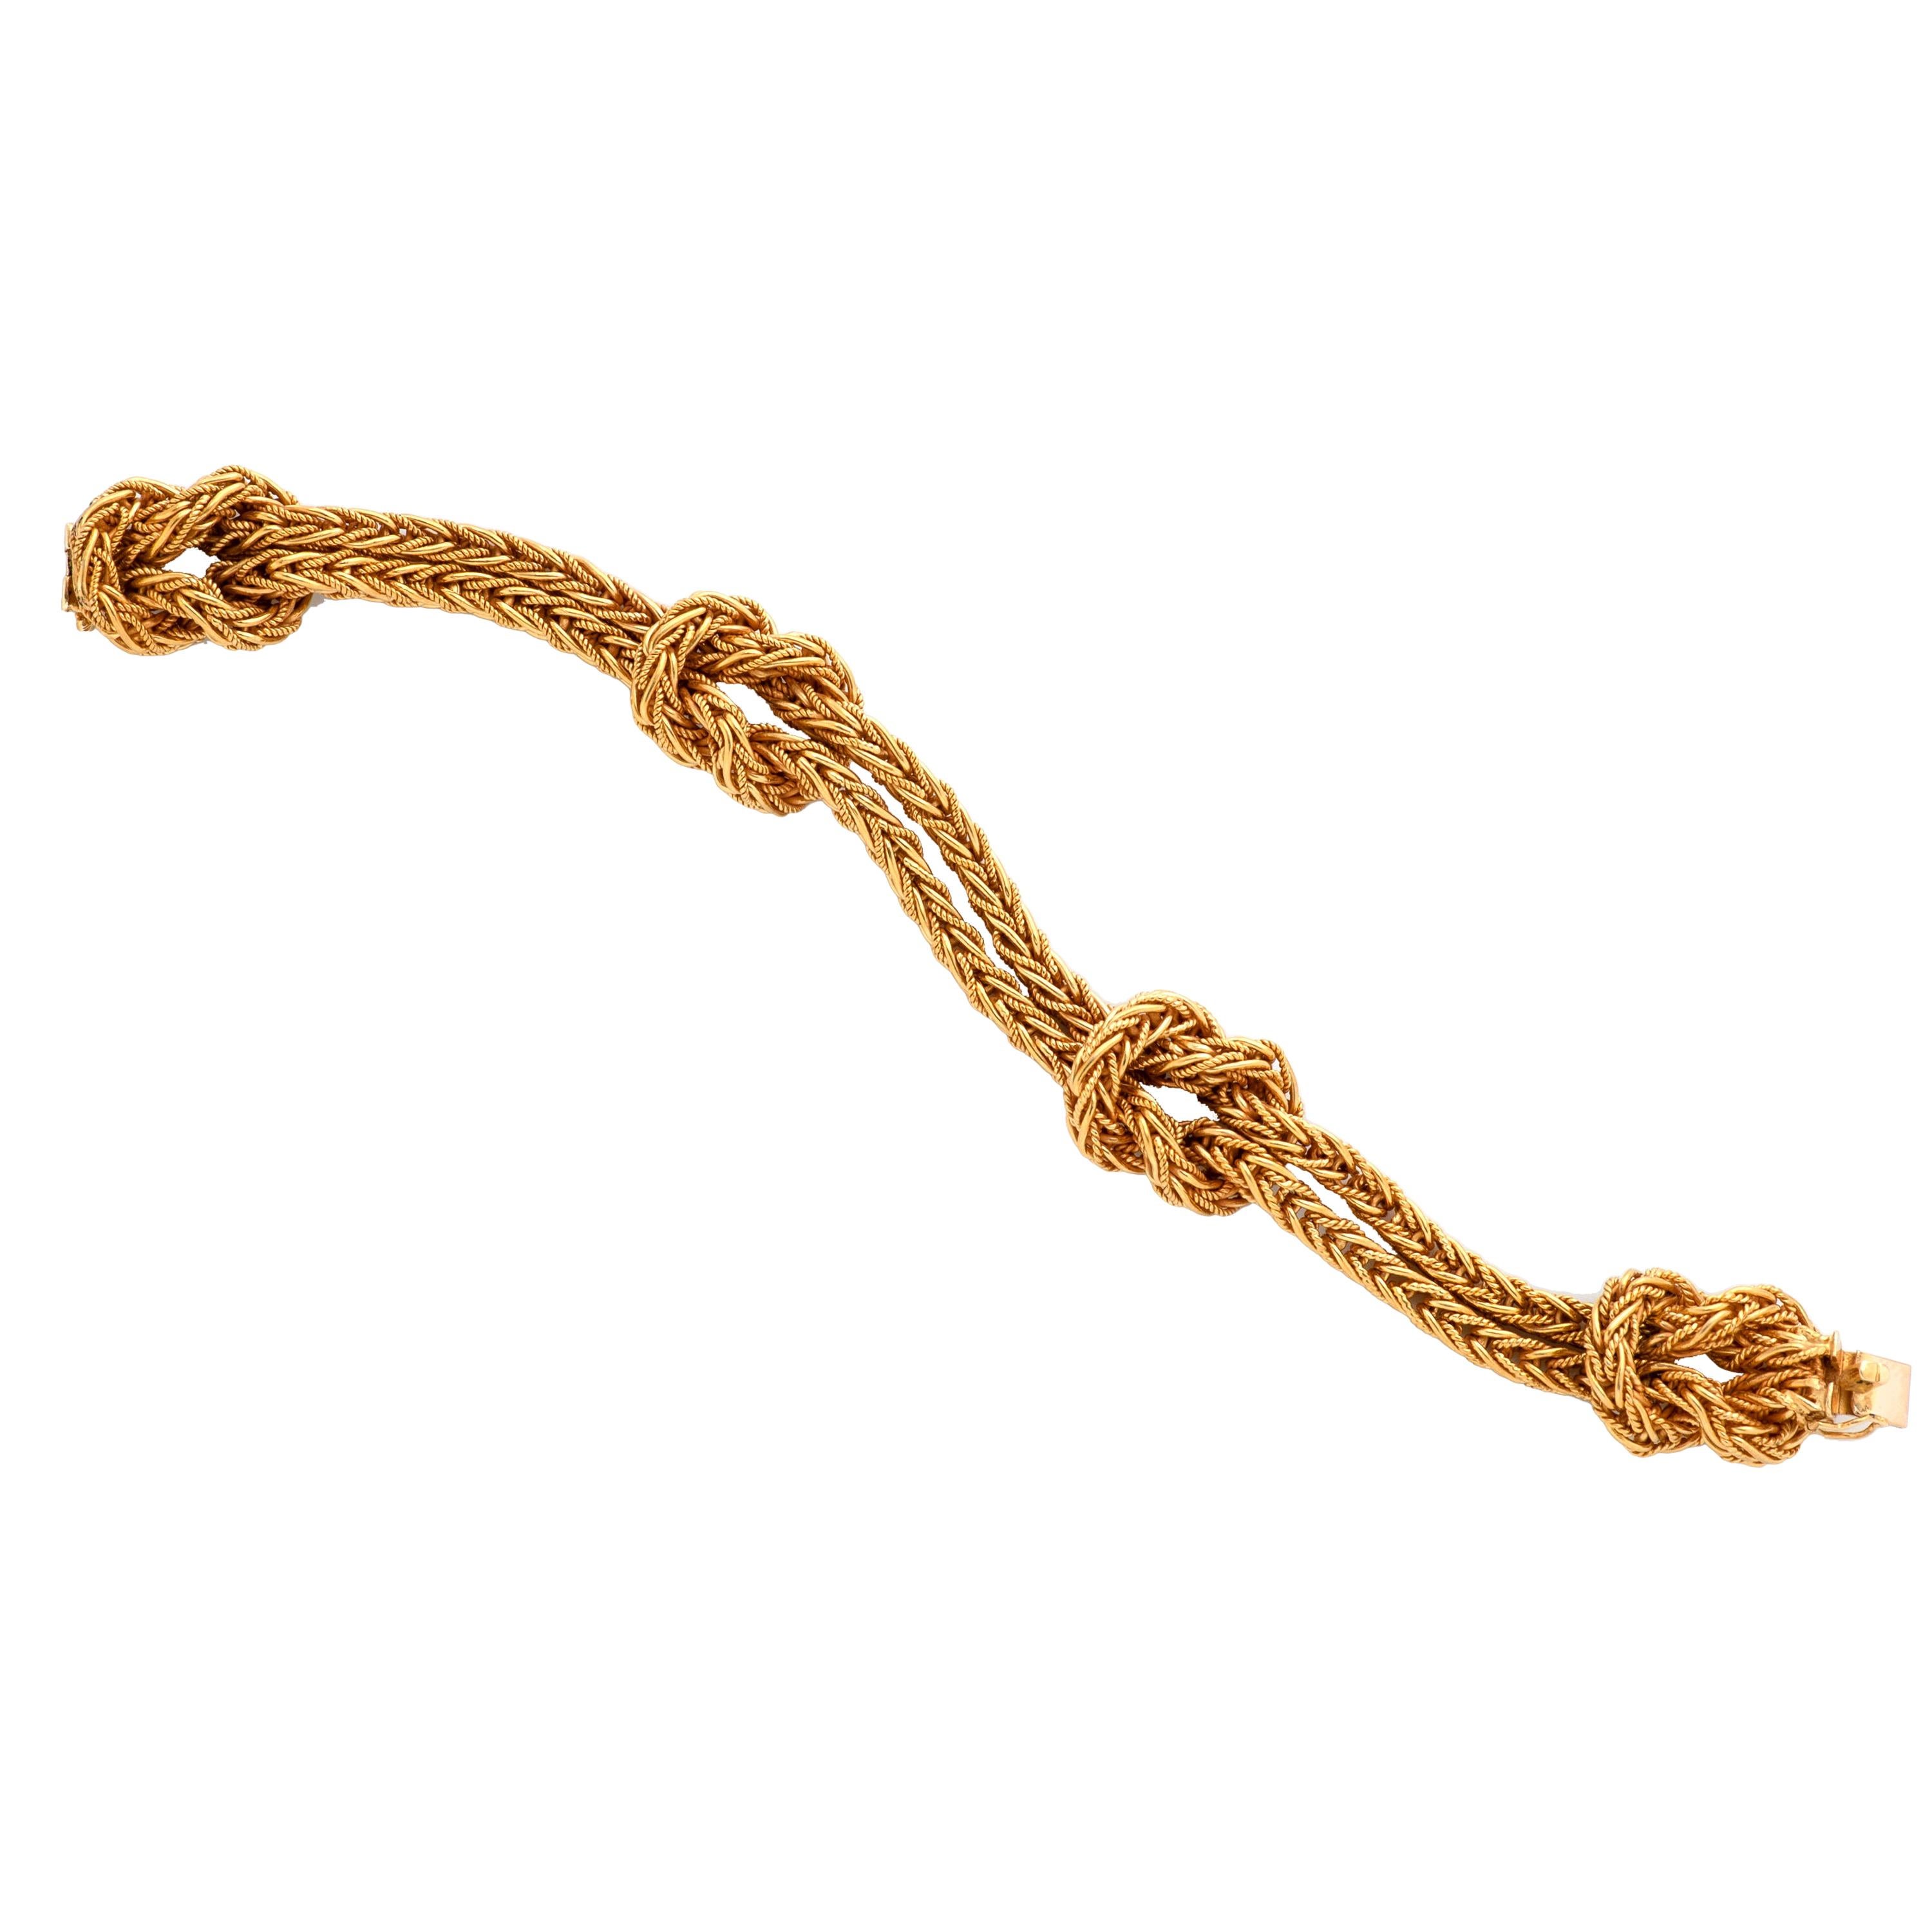 Buccellati Knotted Double Rope Bracelet in 18 Karat Yellow Gold